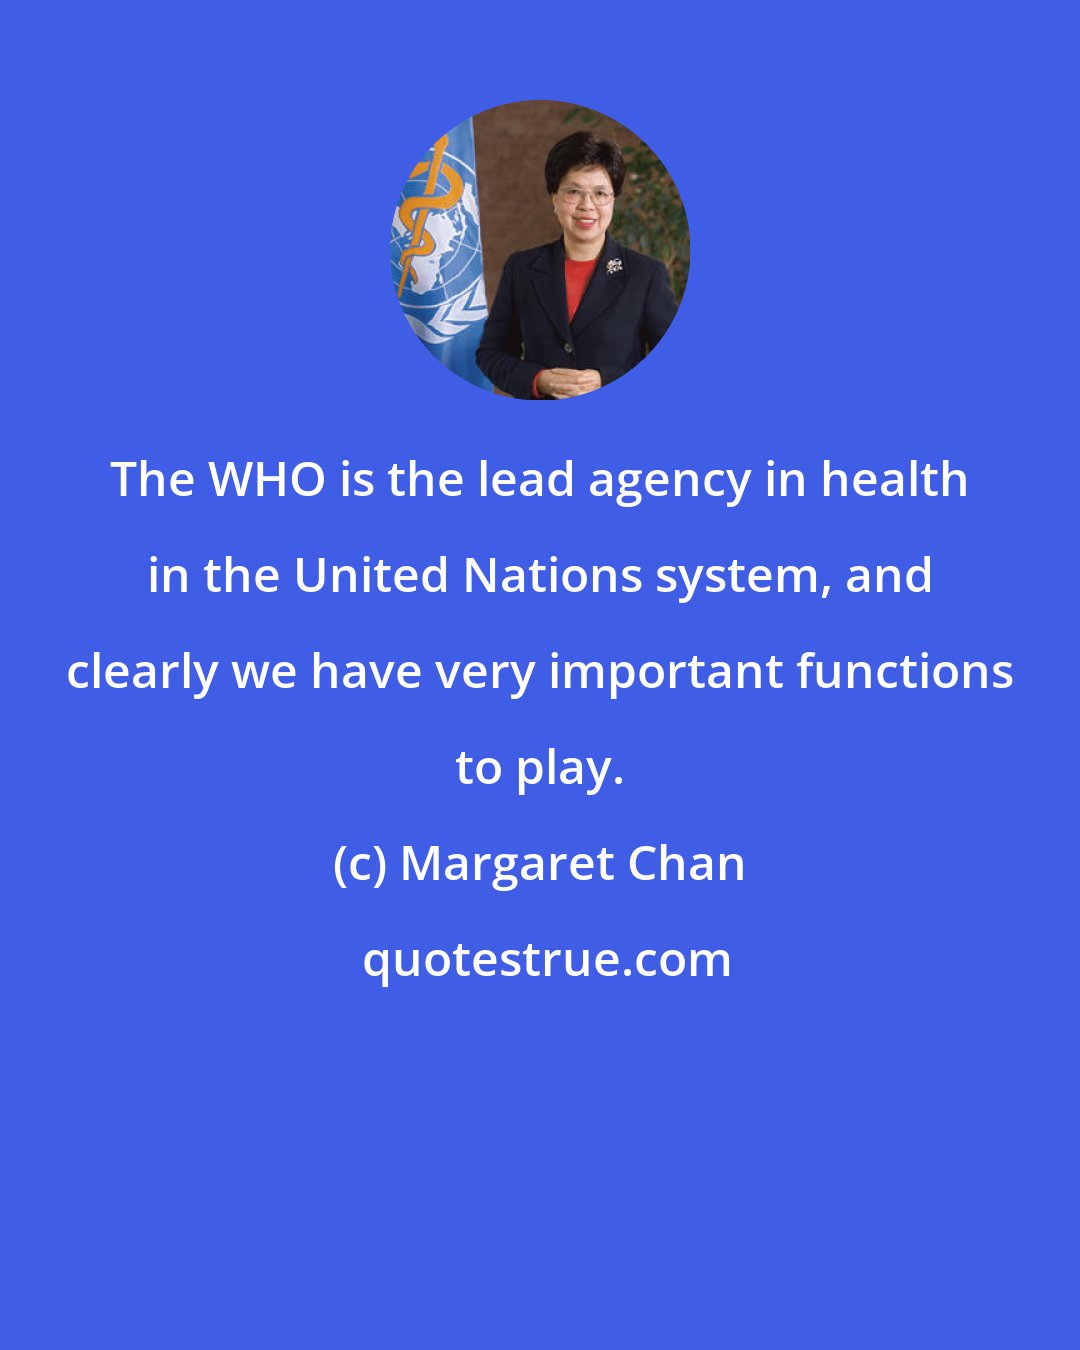 Margaret Chan: The WHO is the lead agency in health in the United Nations system, and clearly we have very important functions to play.